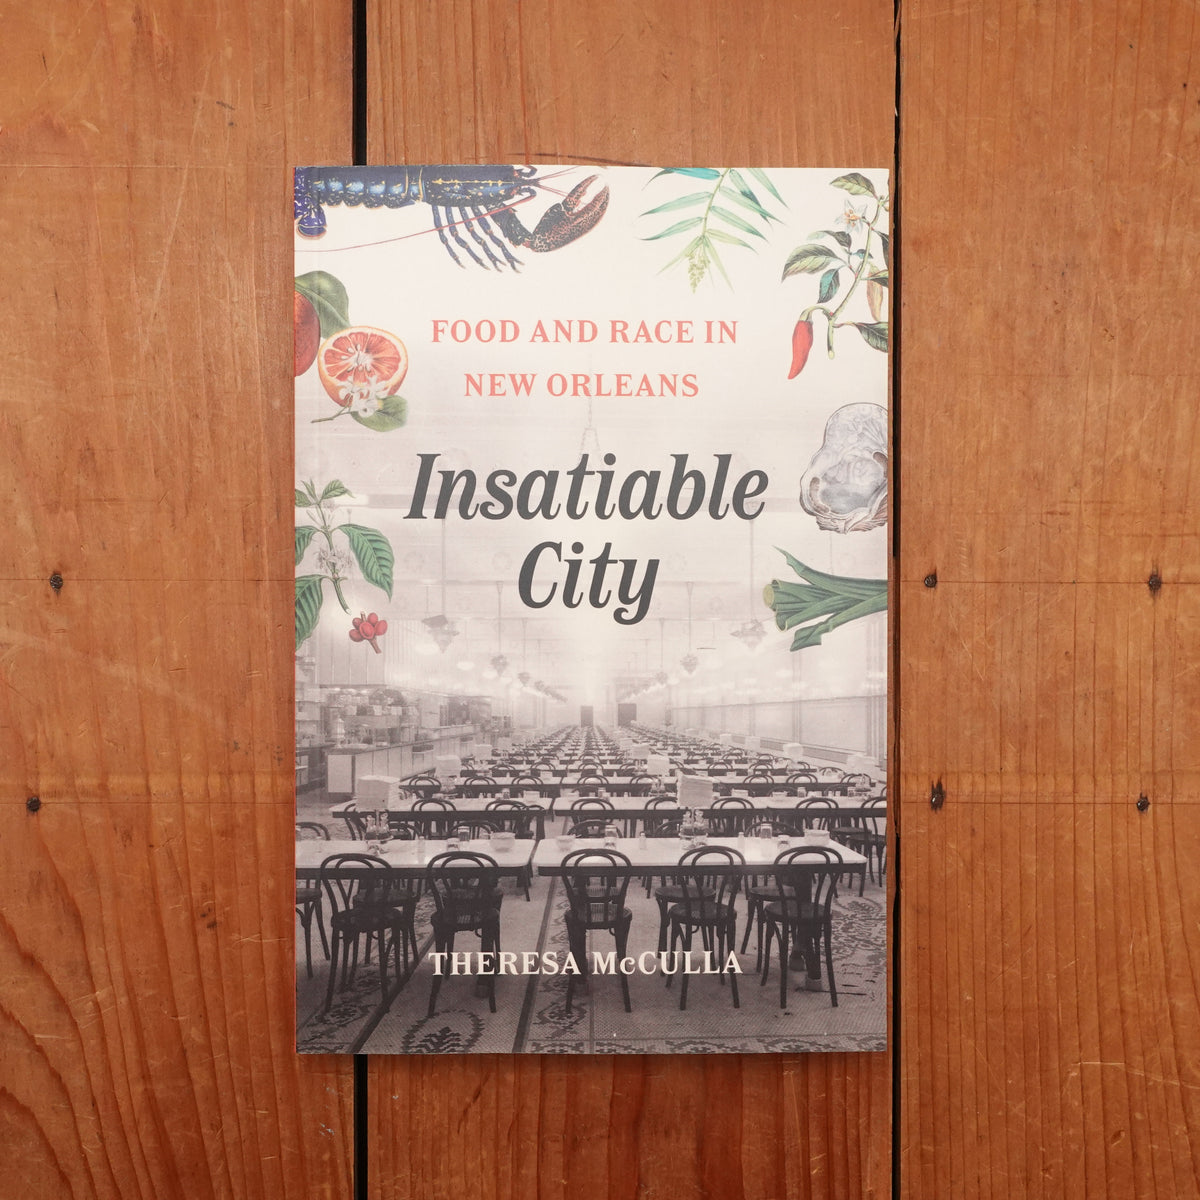 Insatiable City: Food and Race in New Orleans - Theresa McCulla